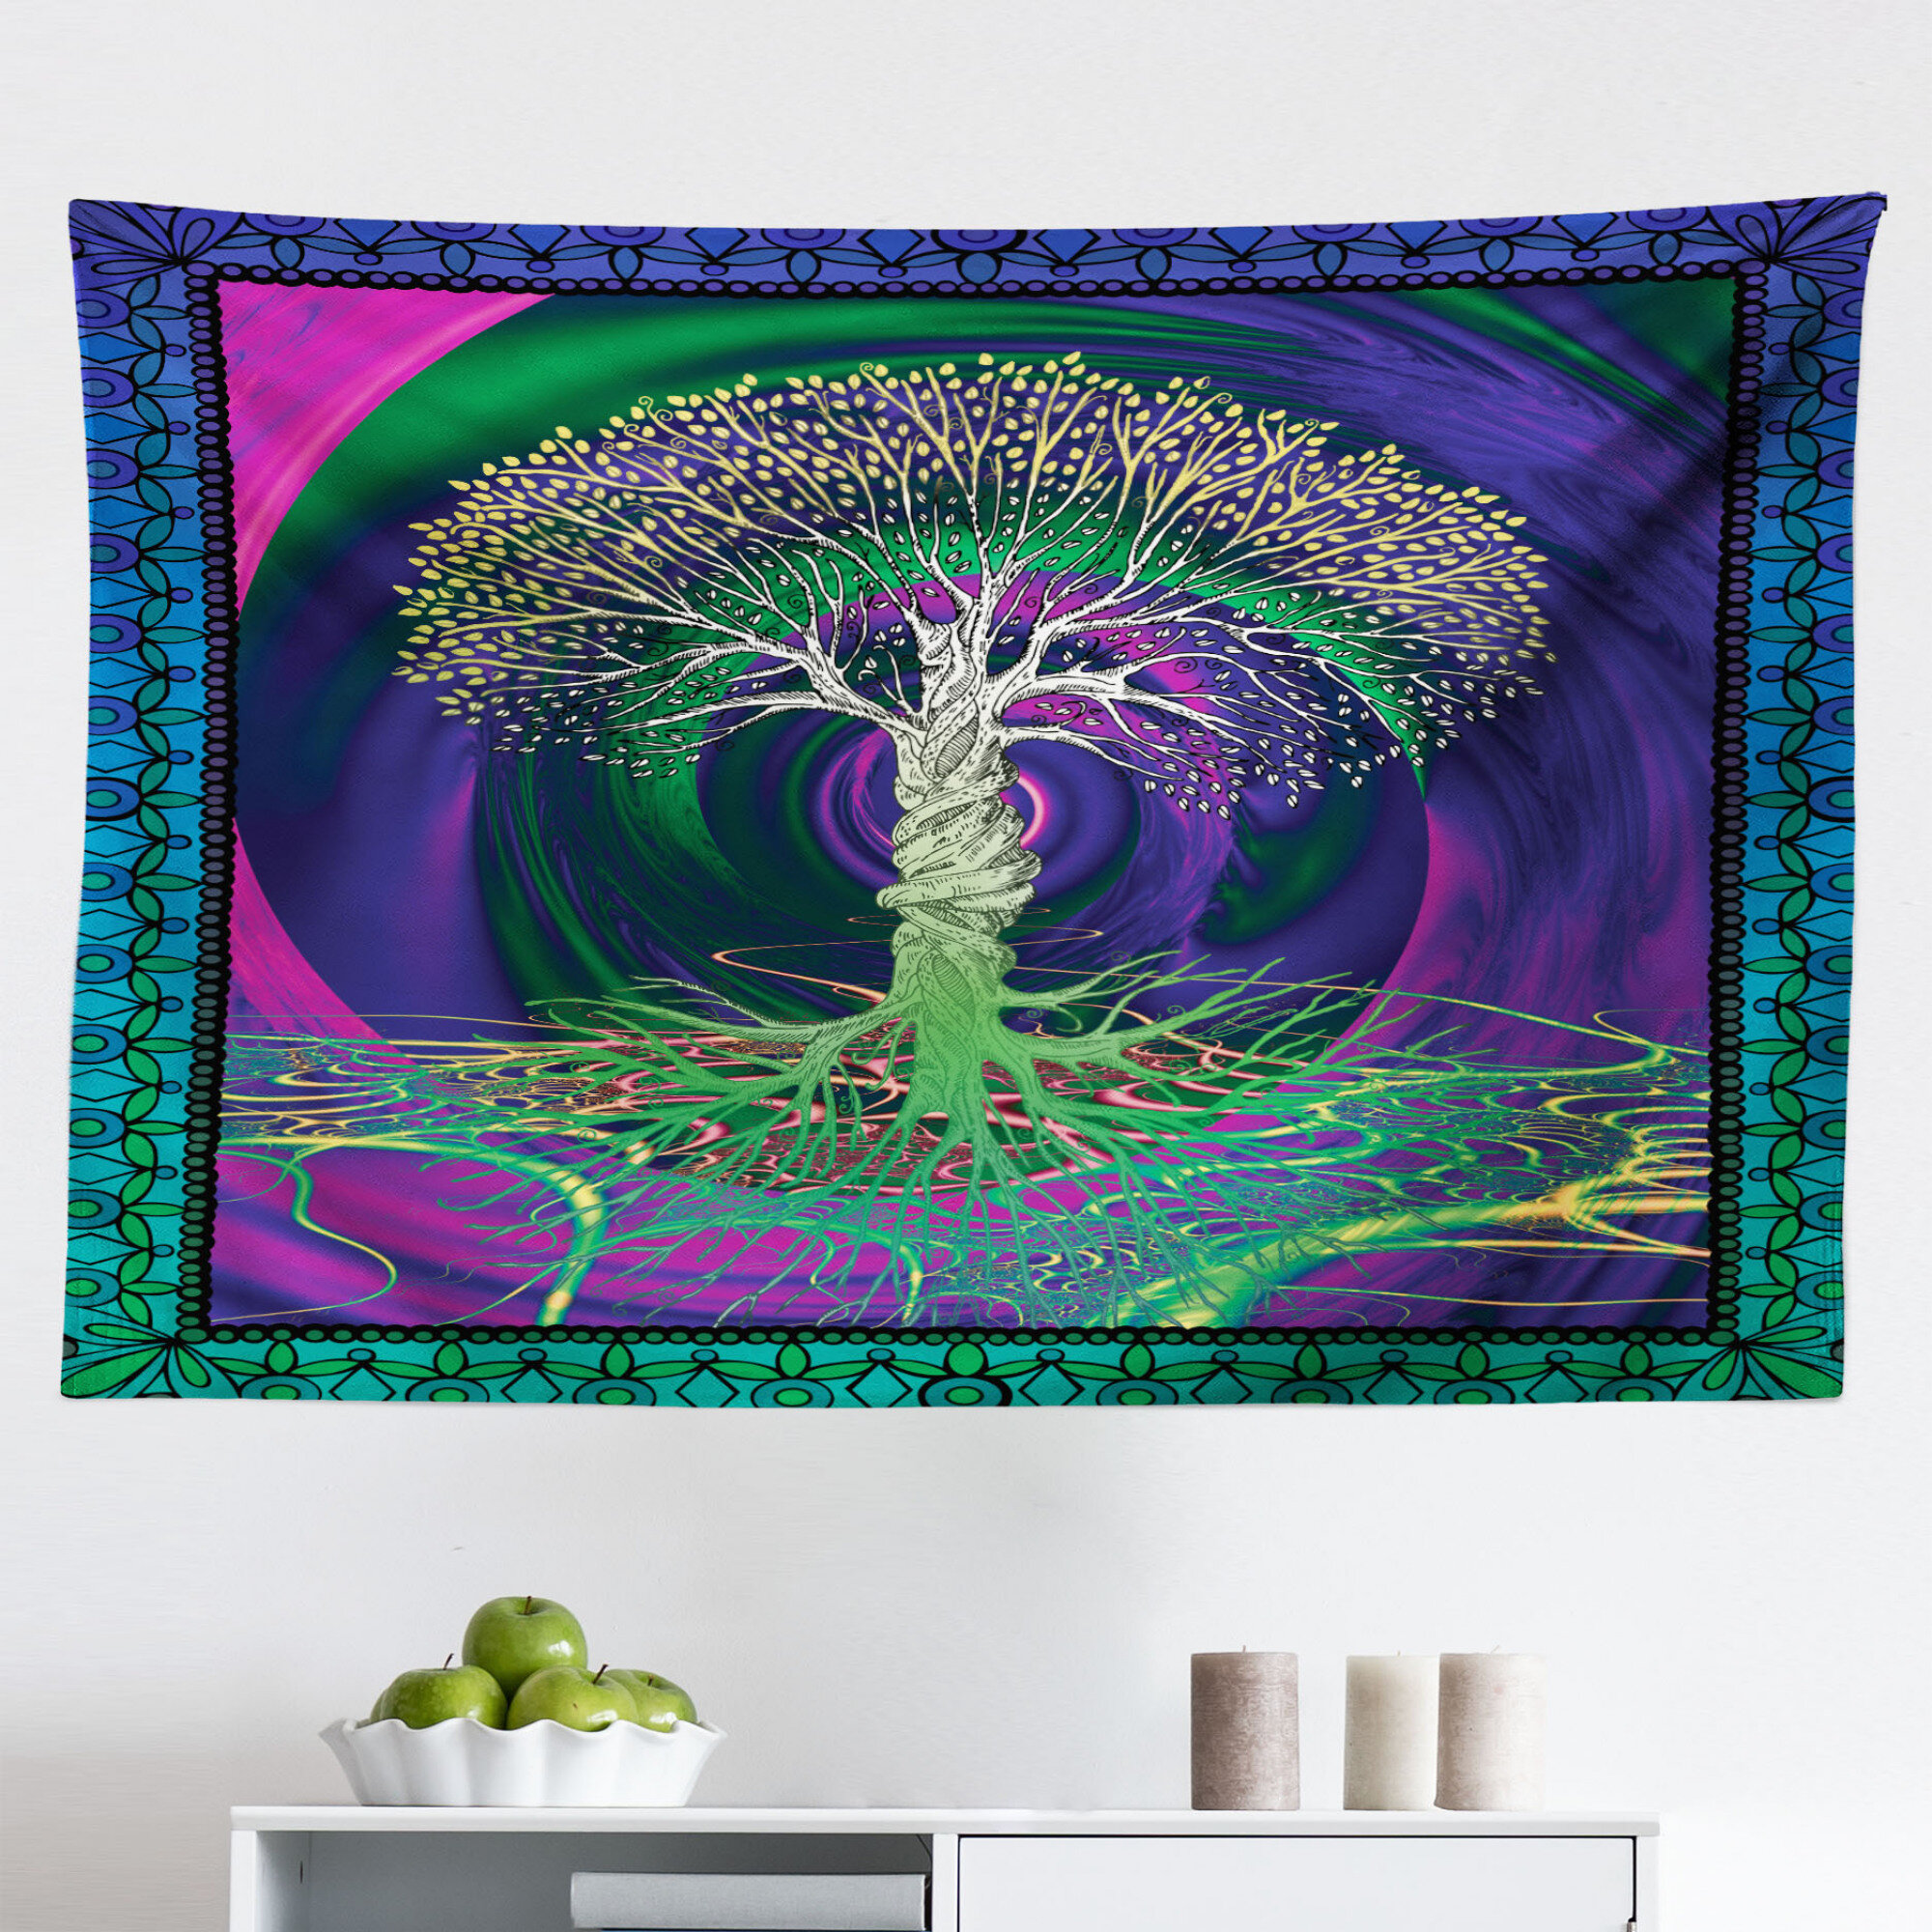 Ambesonne Tapestry Decorative Wall Hanging for Bedroom Living Room Dorm 